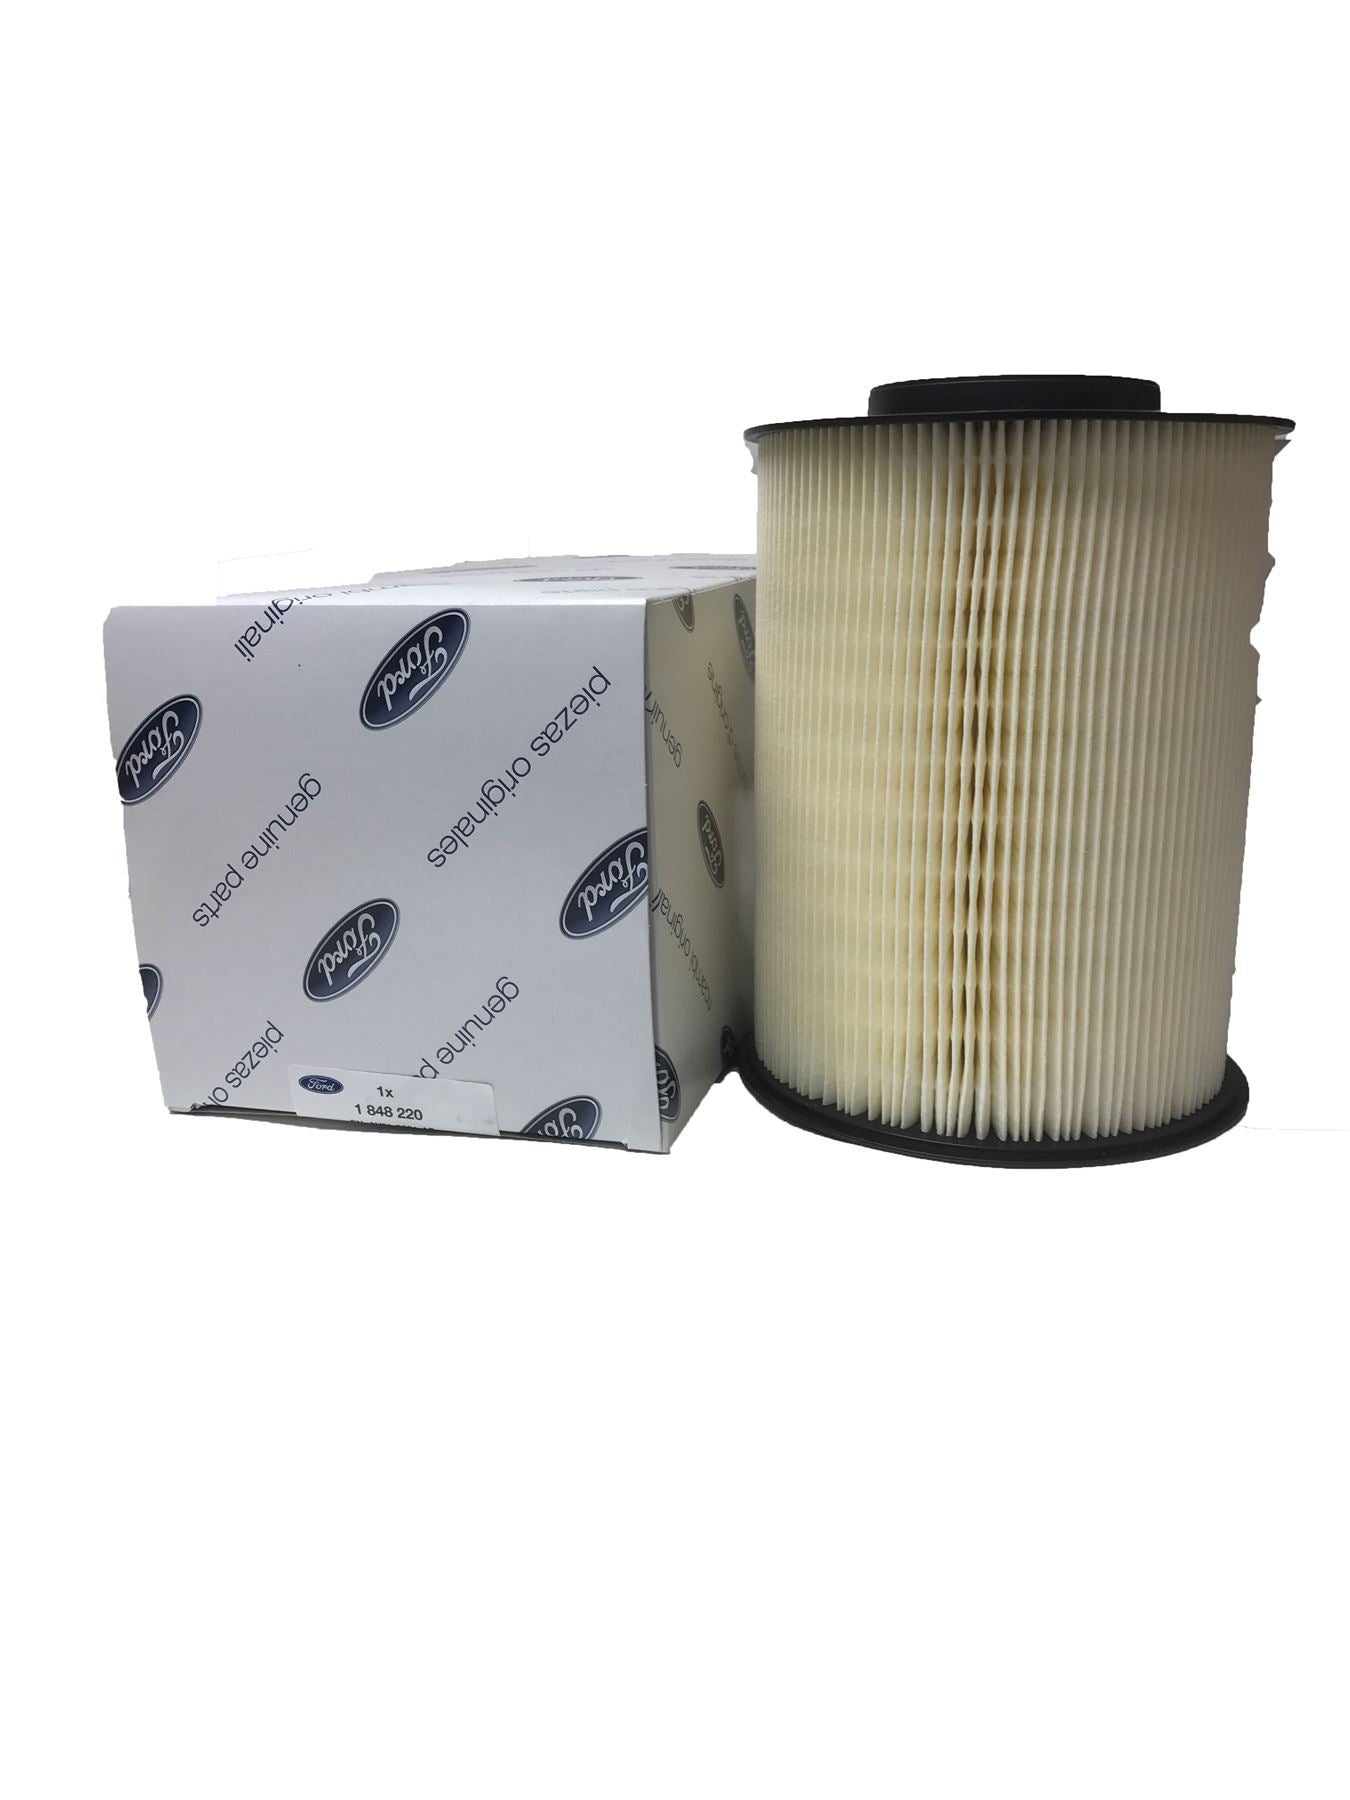 GENUINE FORD FOCUS III 1.6 Ti 02.12 - 120HP ROUND TYPE AIR FILTER 1848220